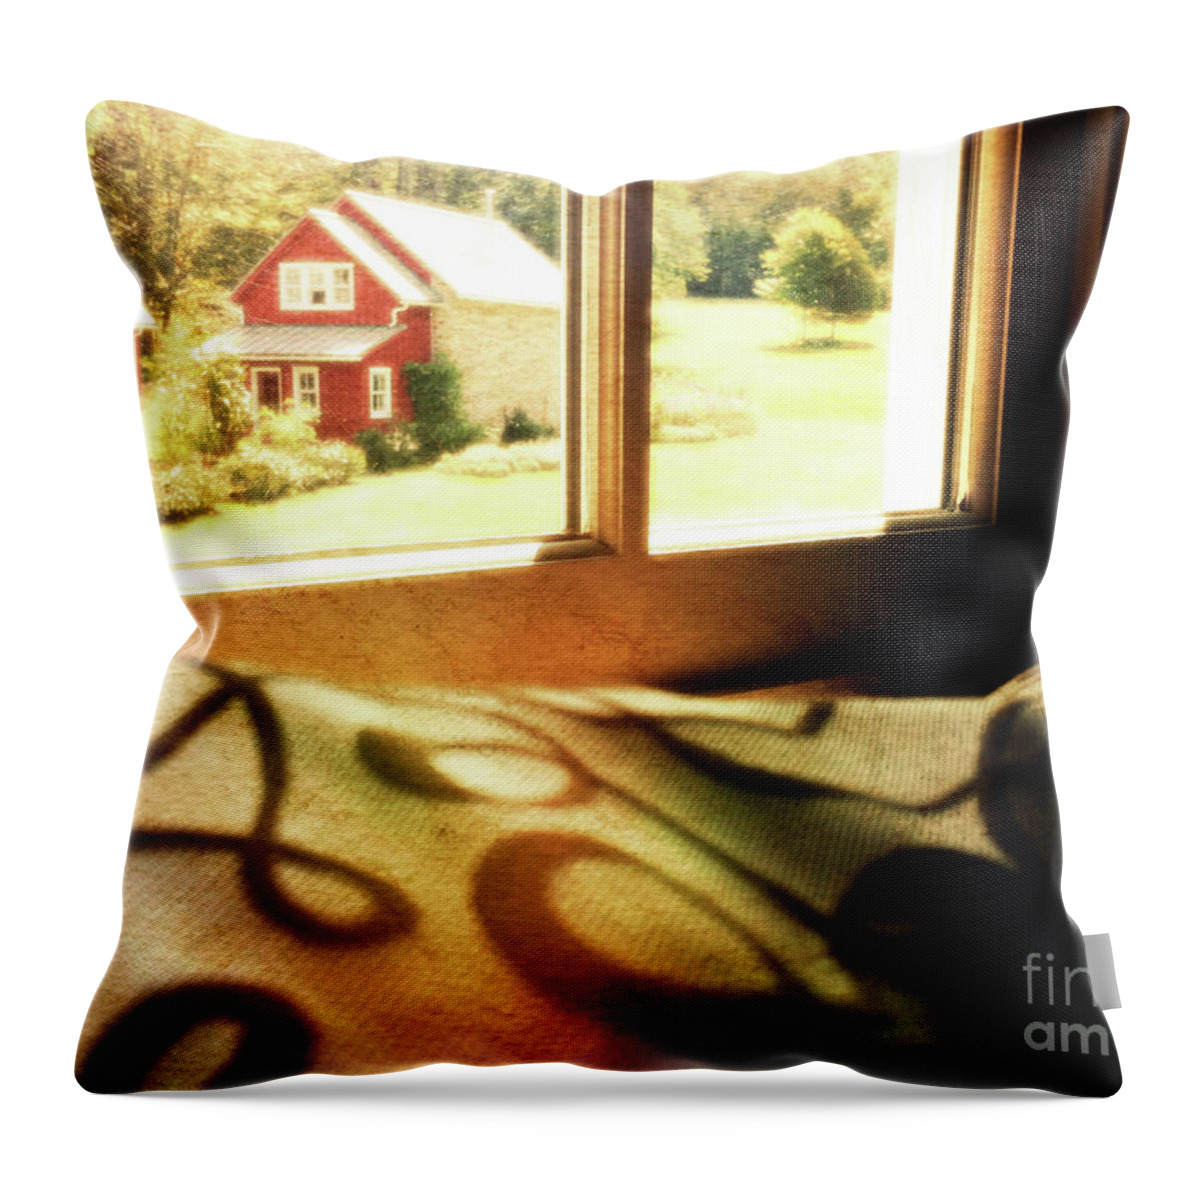 Window Seat Throw Pillow featuring the photograph Dreams From The Window Seat by Kevyn Bashore